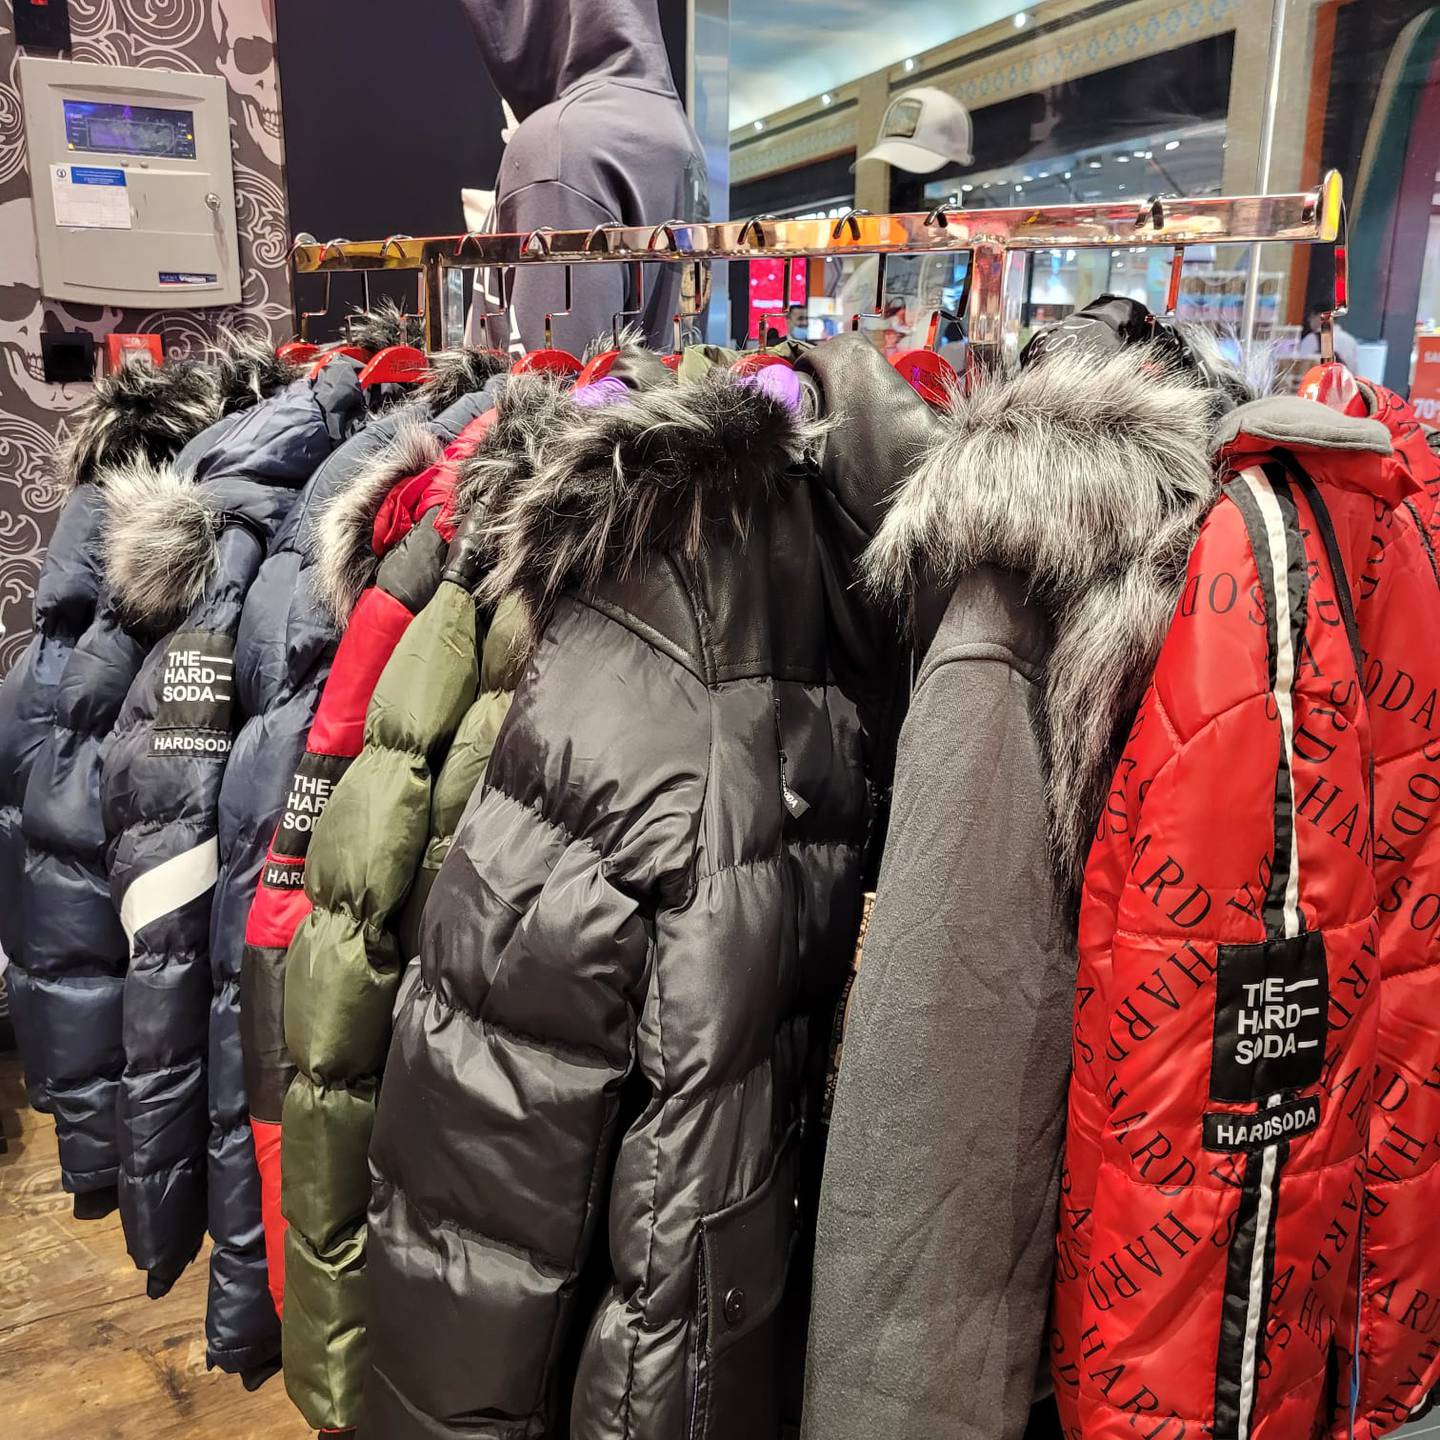 Winter coats were in high demand at Ibn Battuta Mall on Tuesday morning. Photo: Patrick Ryan / The National